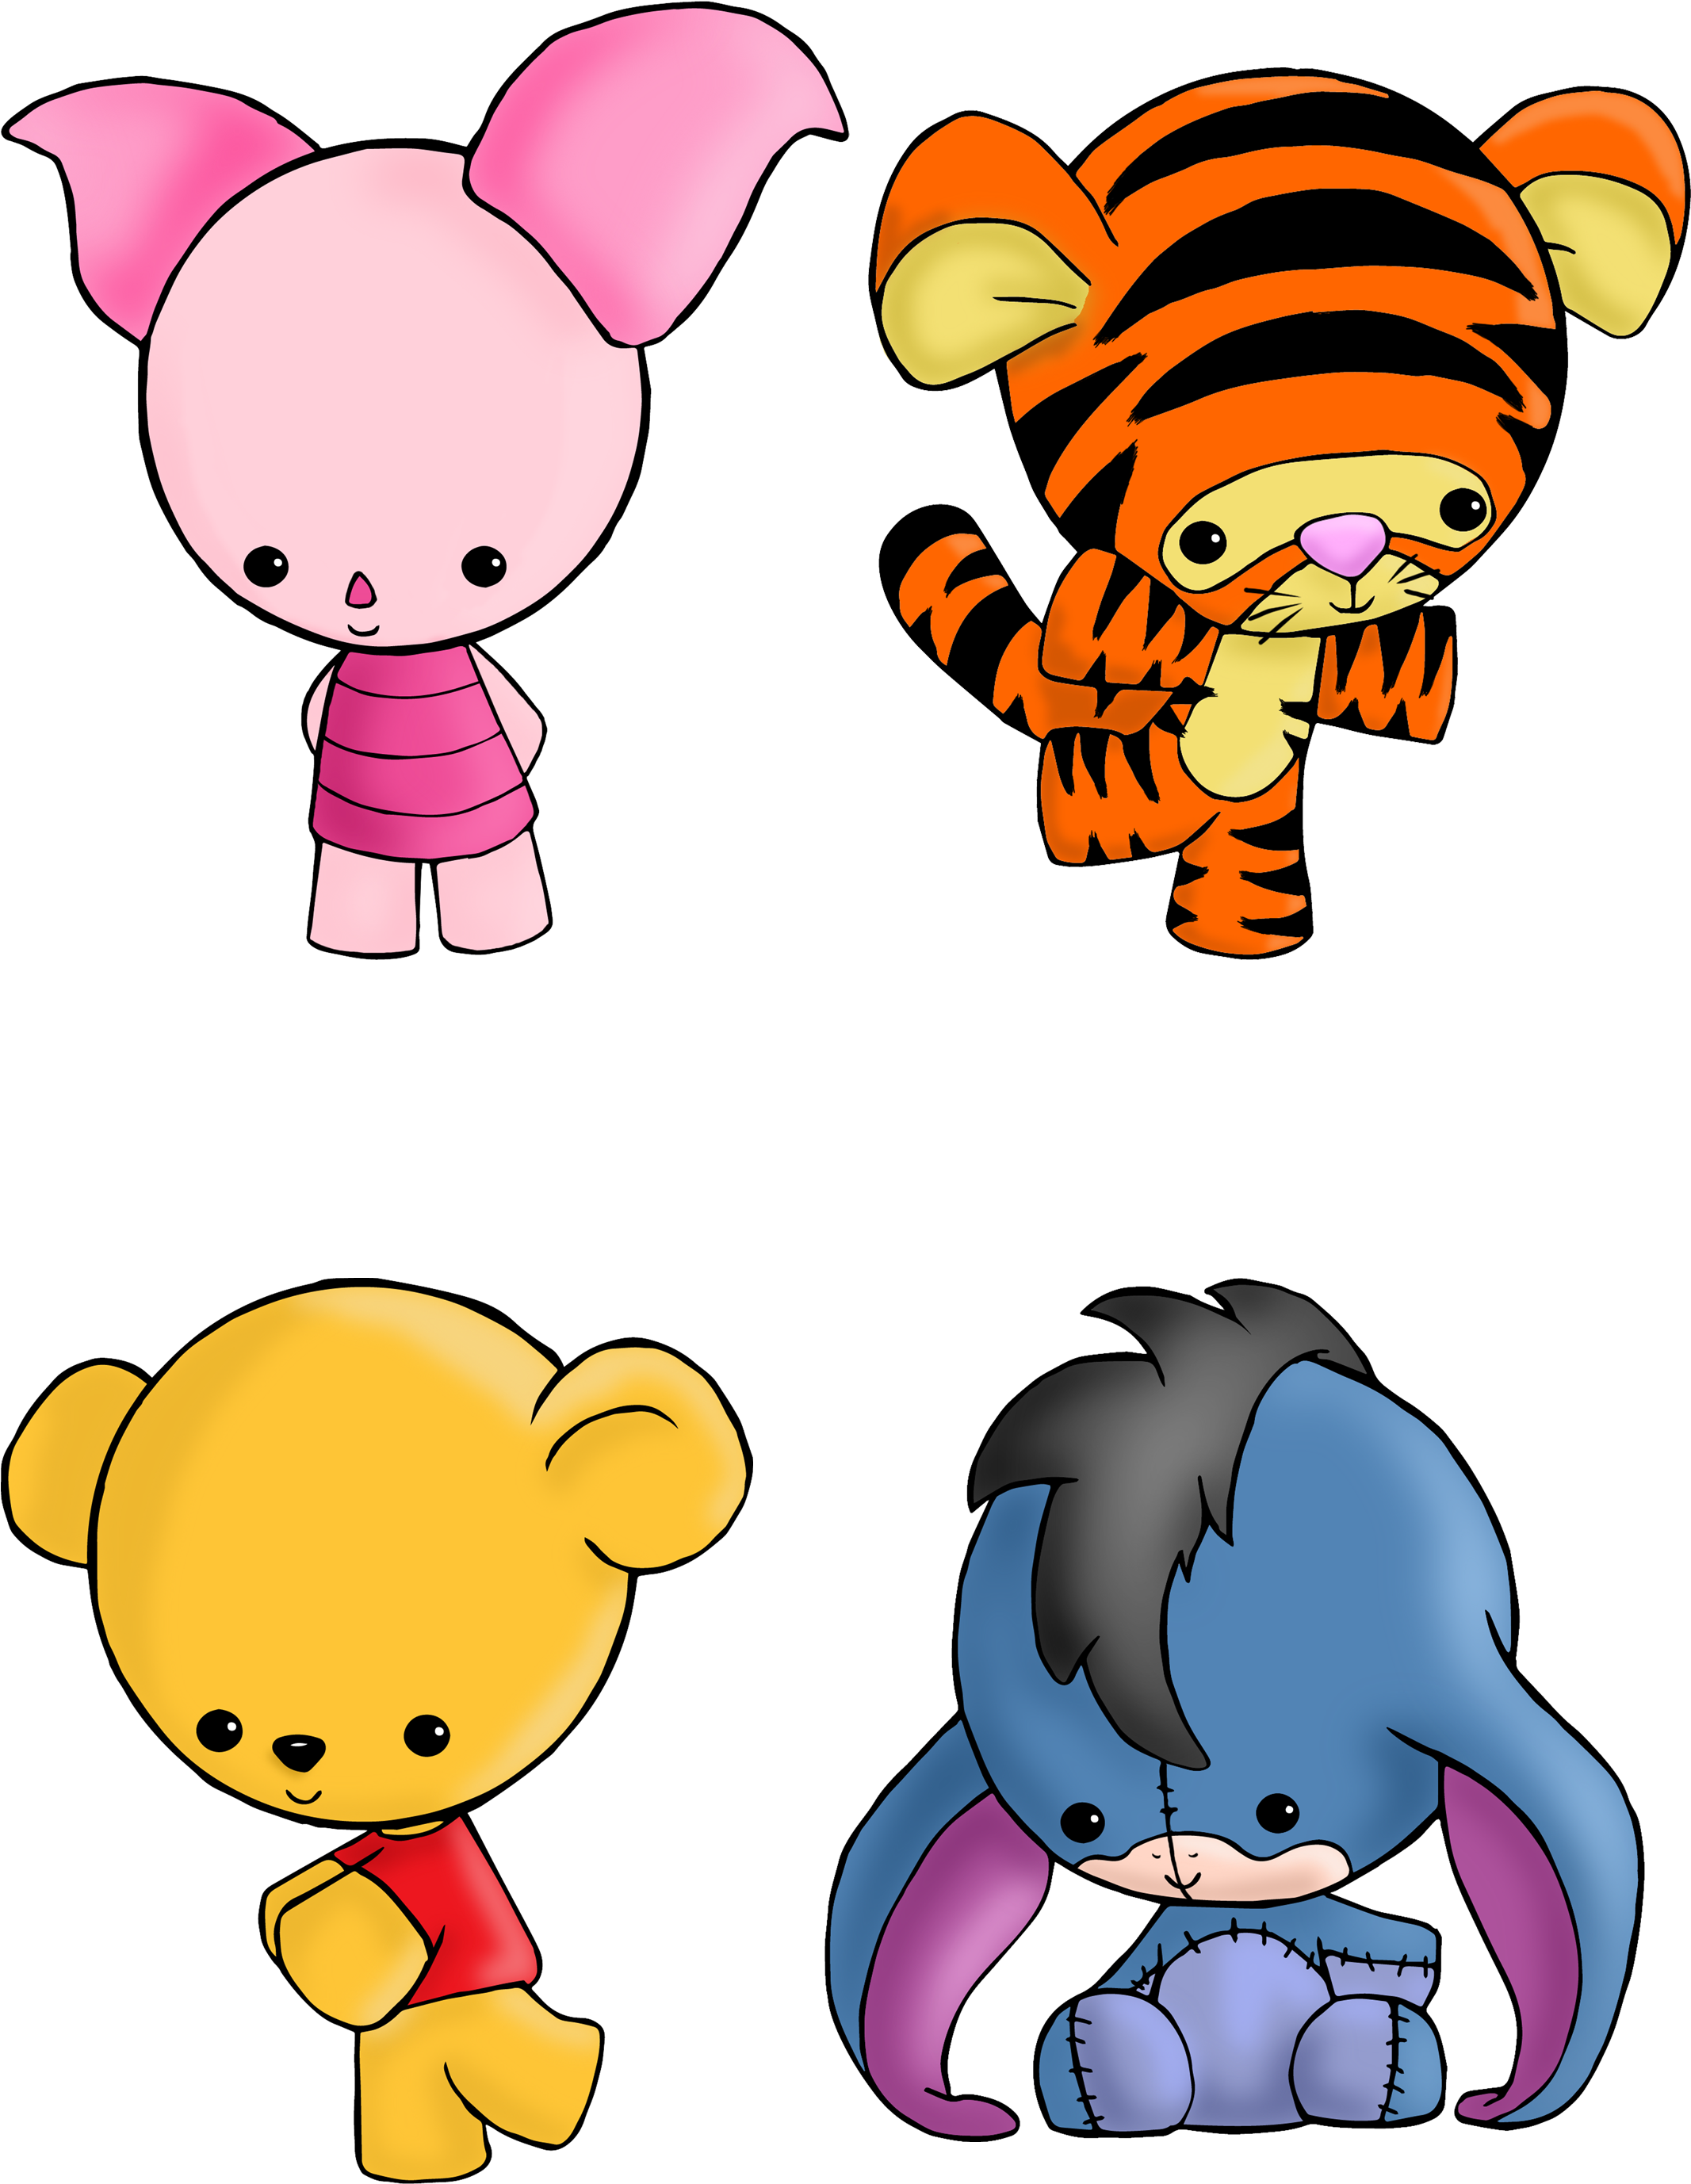 Available On Shirts And As Stickers Here - Zombie Winnie The Pooh (2400x3200)